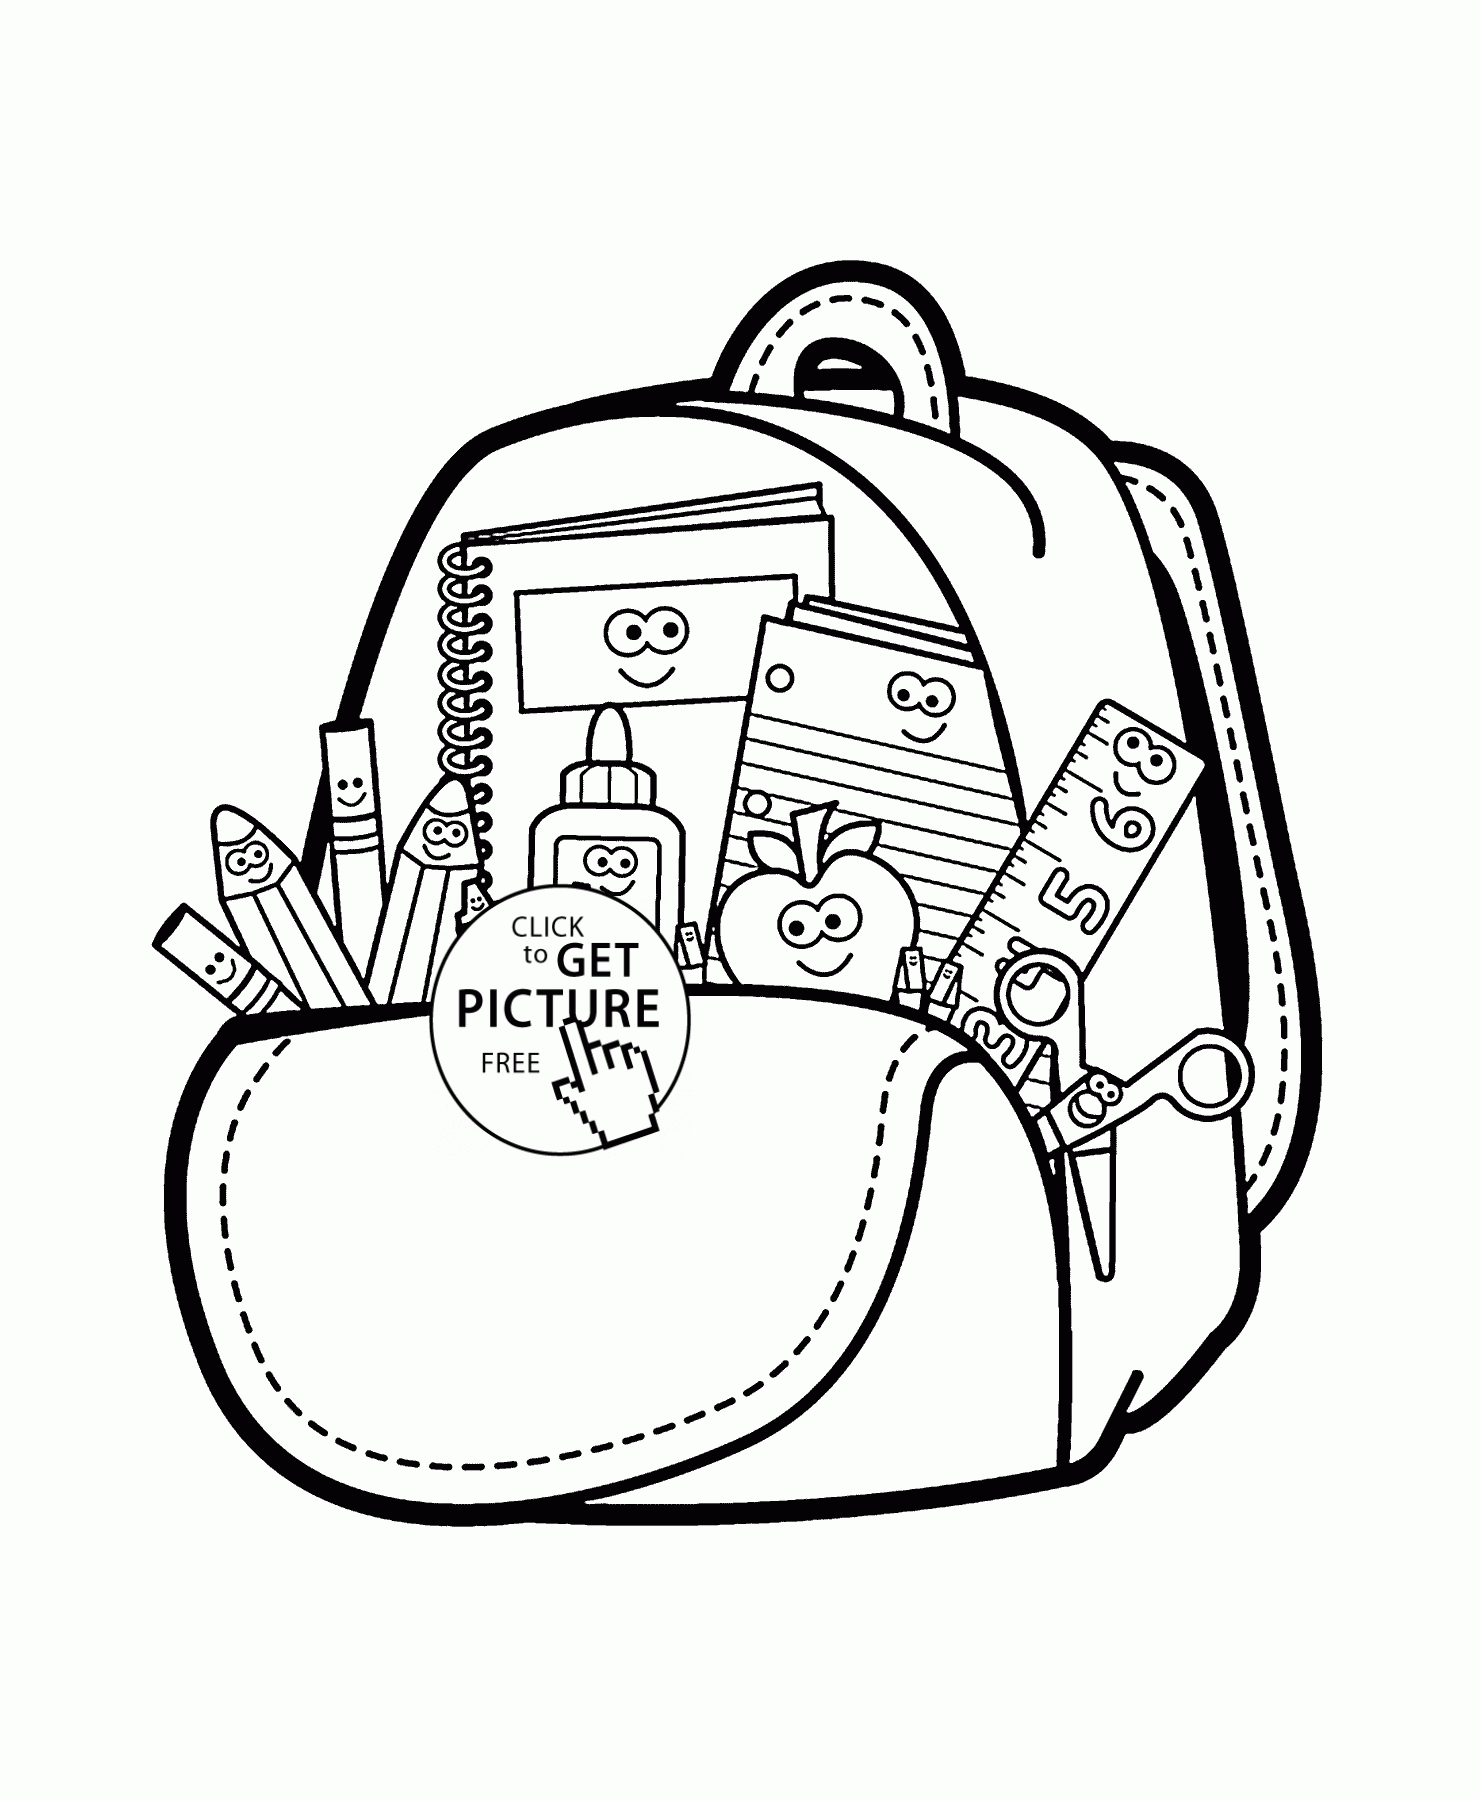 Cartoon School Supplies Coloring Page For Kids, Back To School - Free Printable Coloring Sheets For Back To School